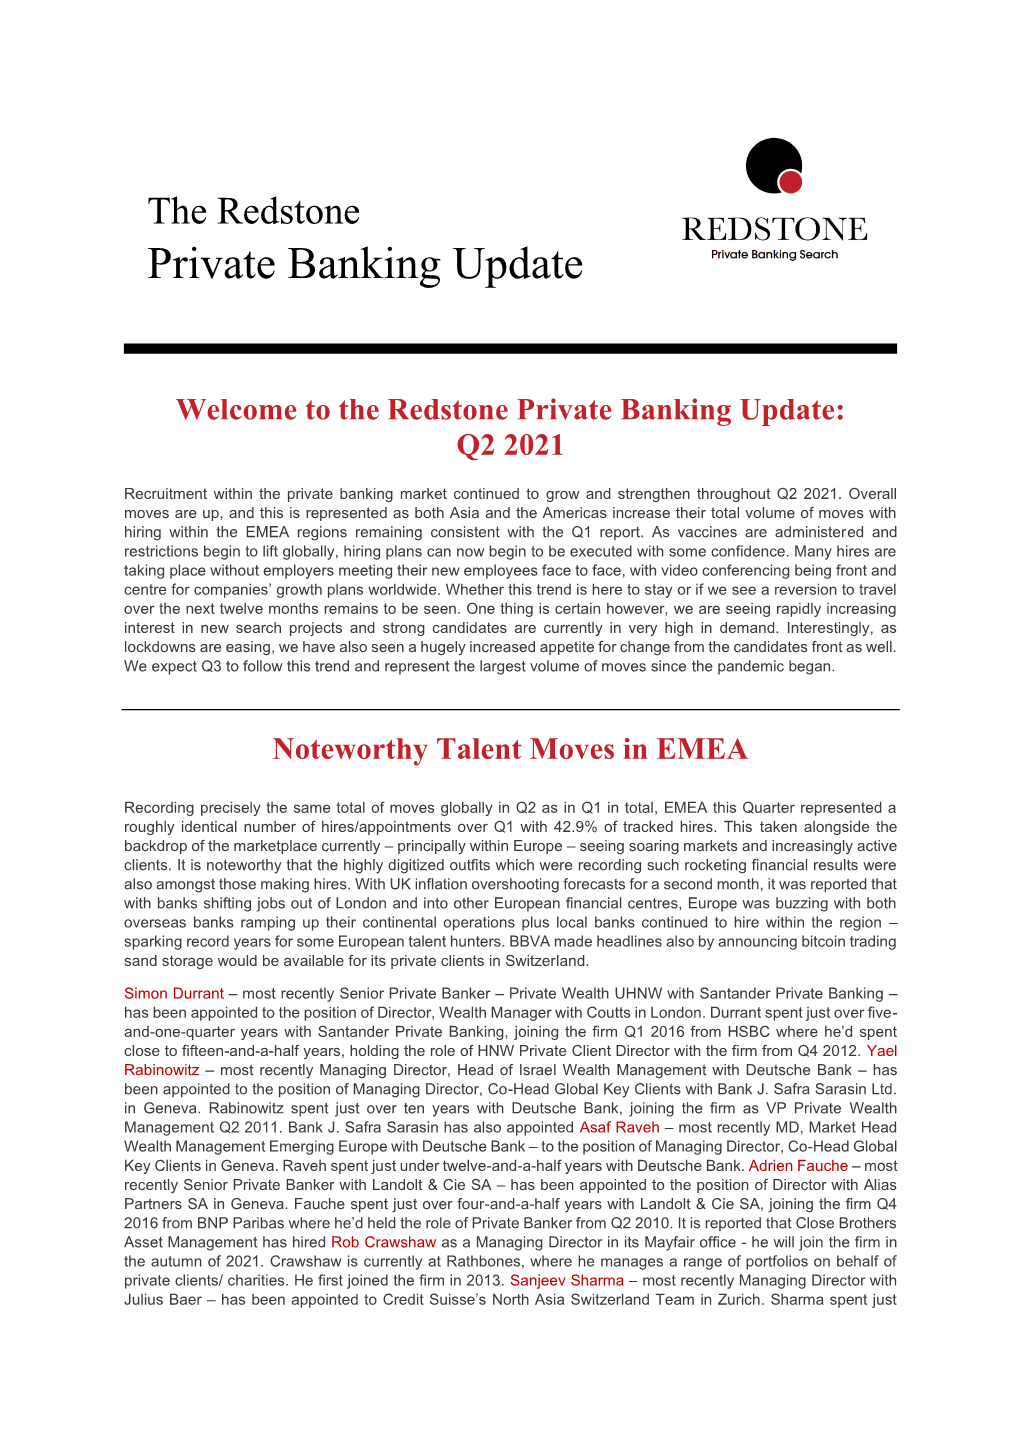 The Redstone Private Banking Update: Q2 2021